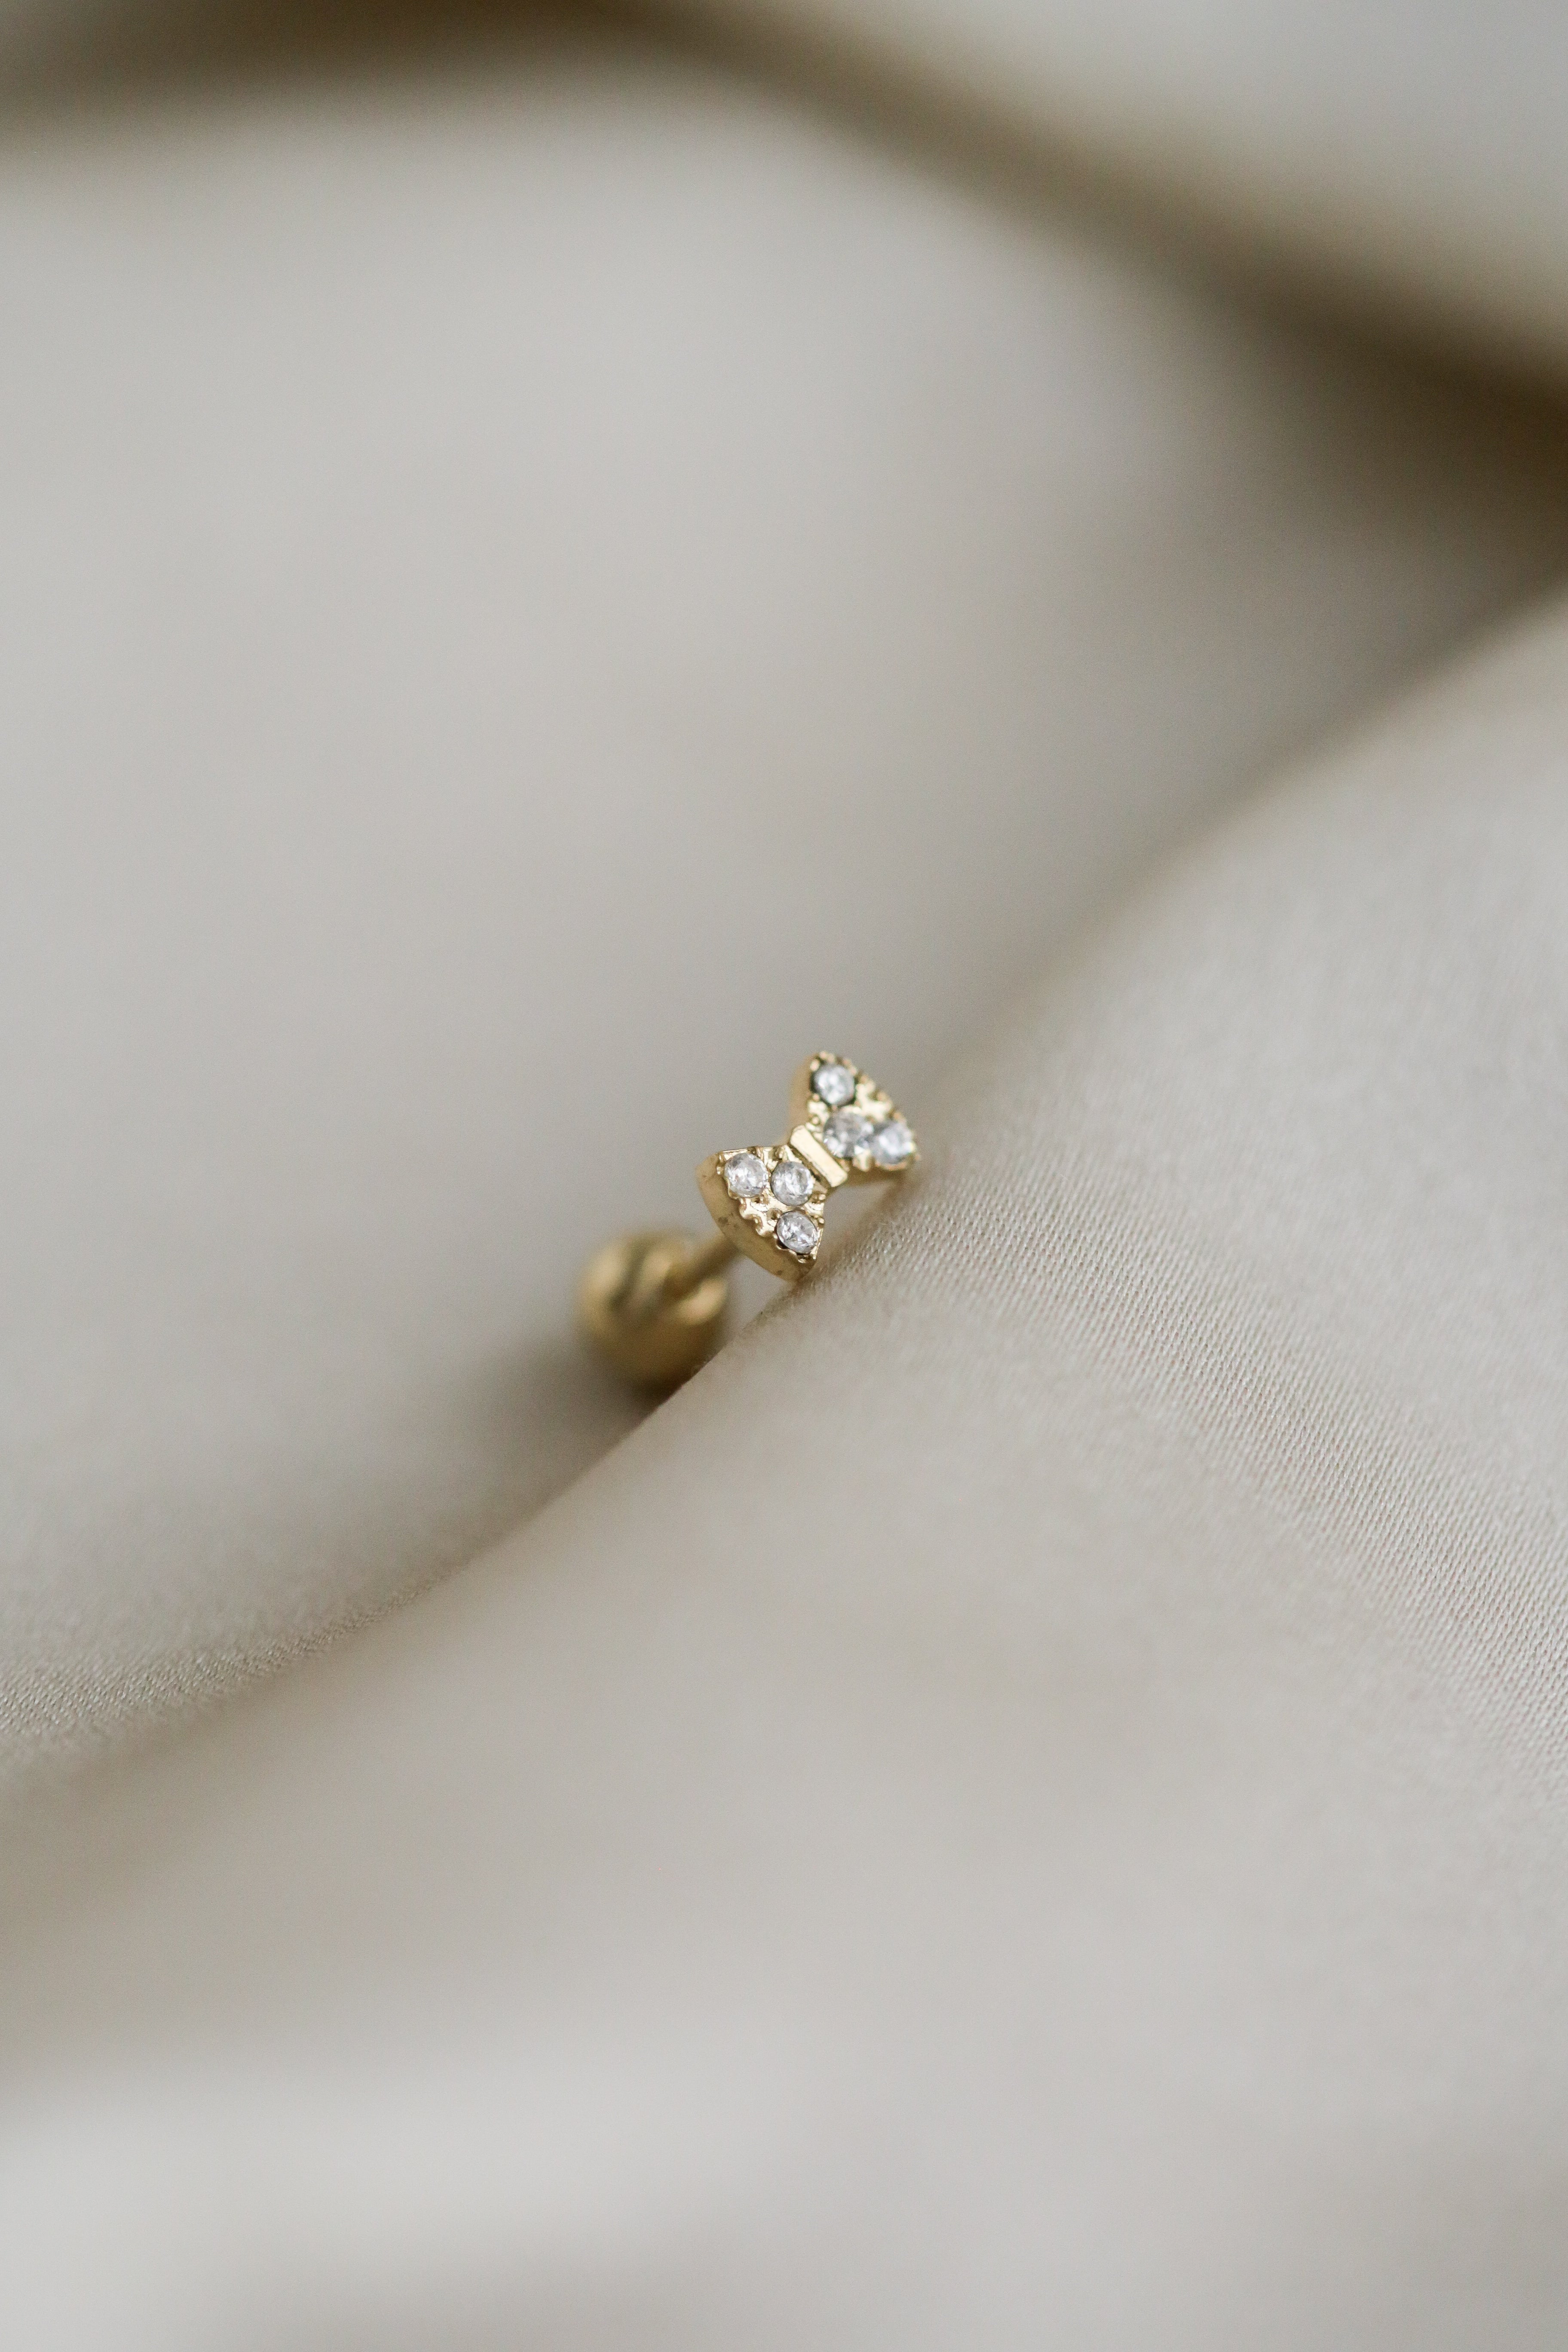 The Heart - Bow Piercing - Boutique Minimaliste has waterproof, durable, elegant and vintage inspired jewelry